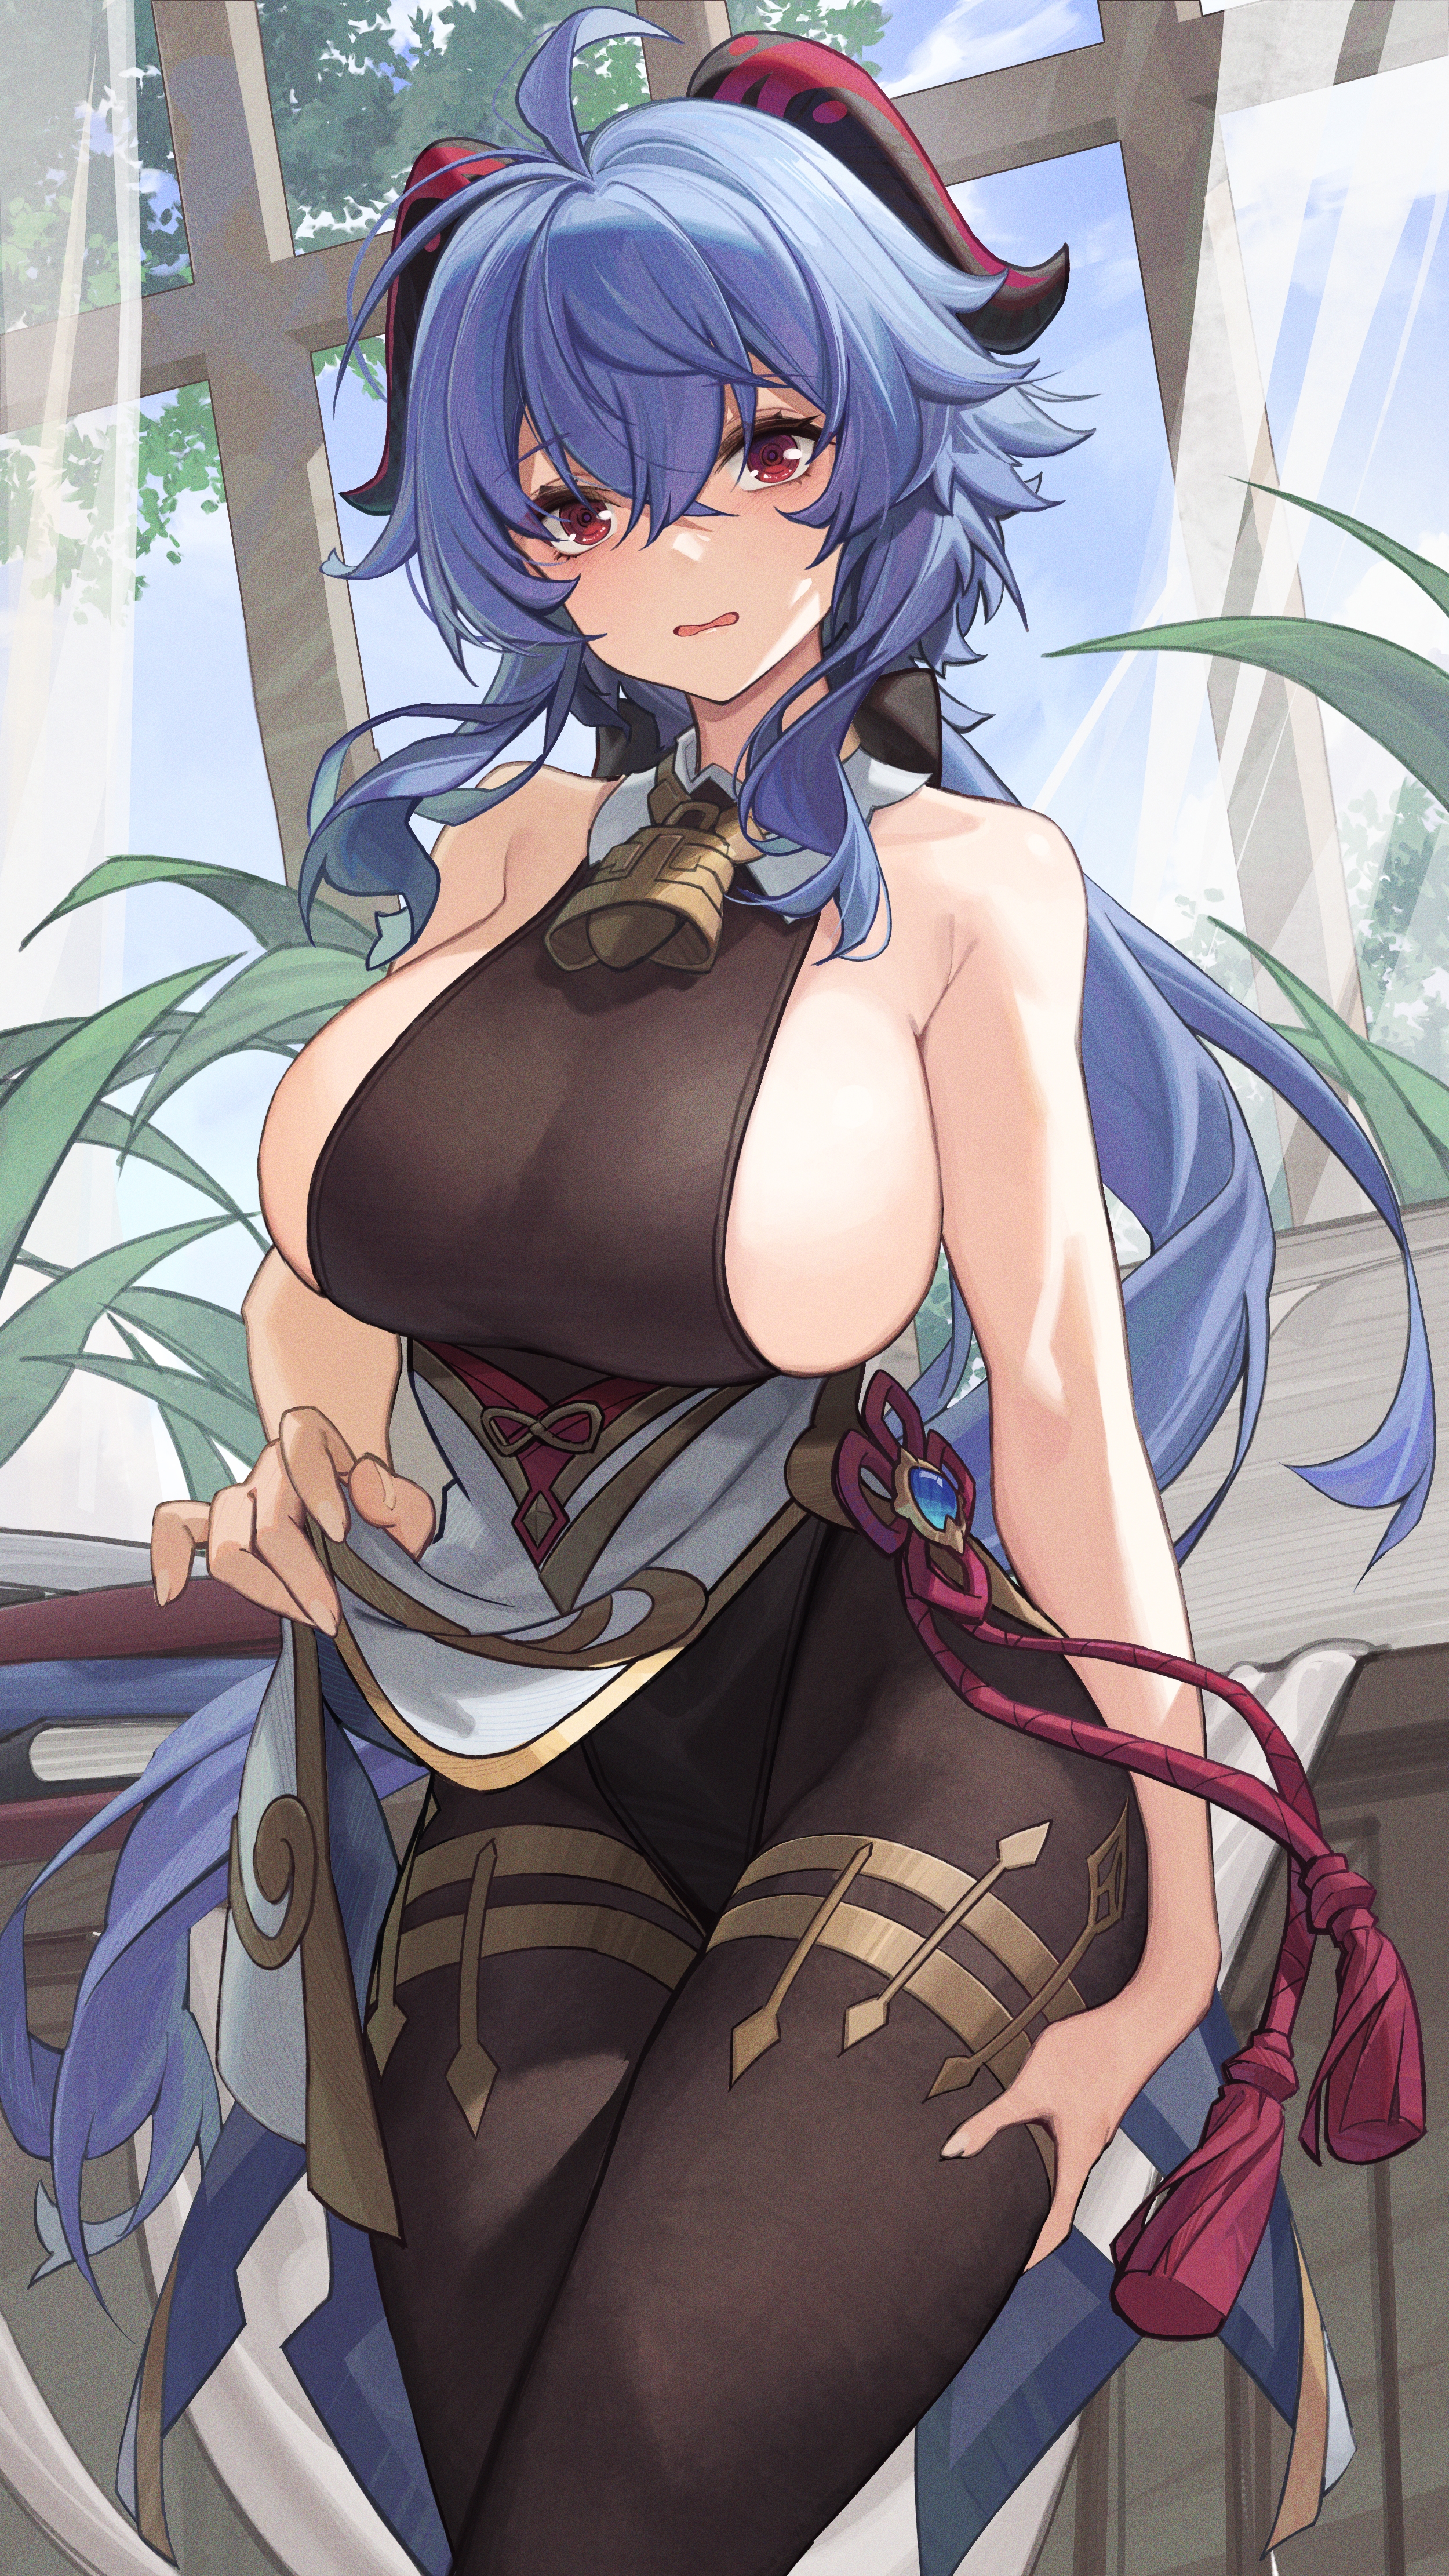 Anime 2500x4444 anime anime girls Genshin Impact blue hair Ganyu (Genshin Impact) big boobs horns red eyes sideboob portrait display low-angle lifting clothes long hair embarrassed hand on leg looking at viewer hand on thigh